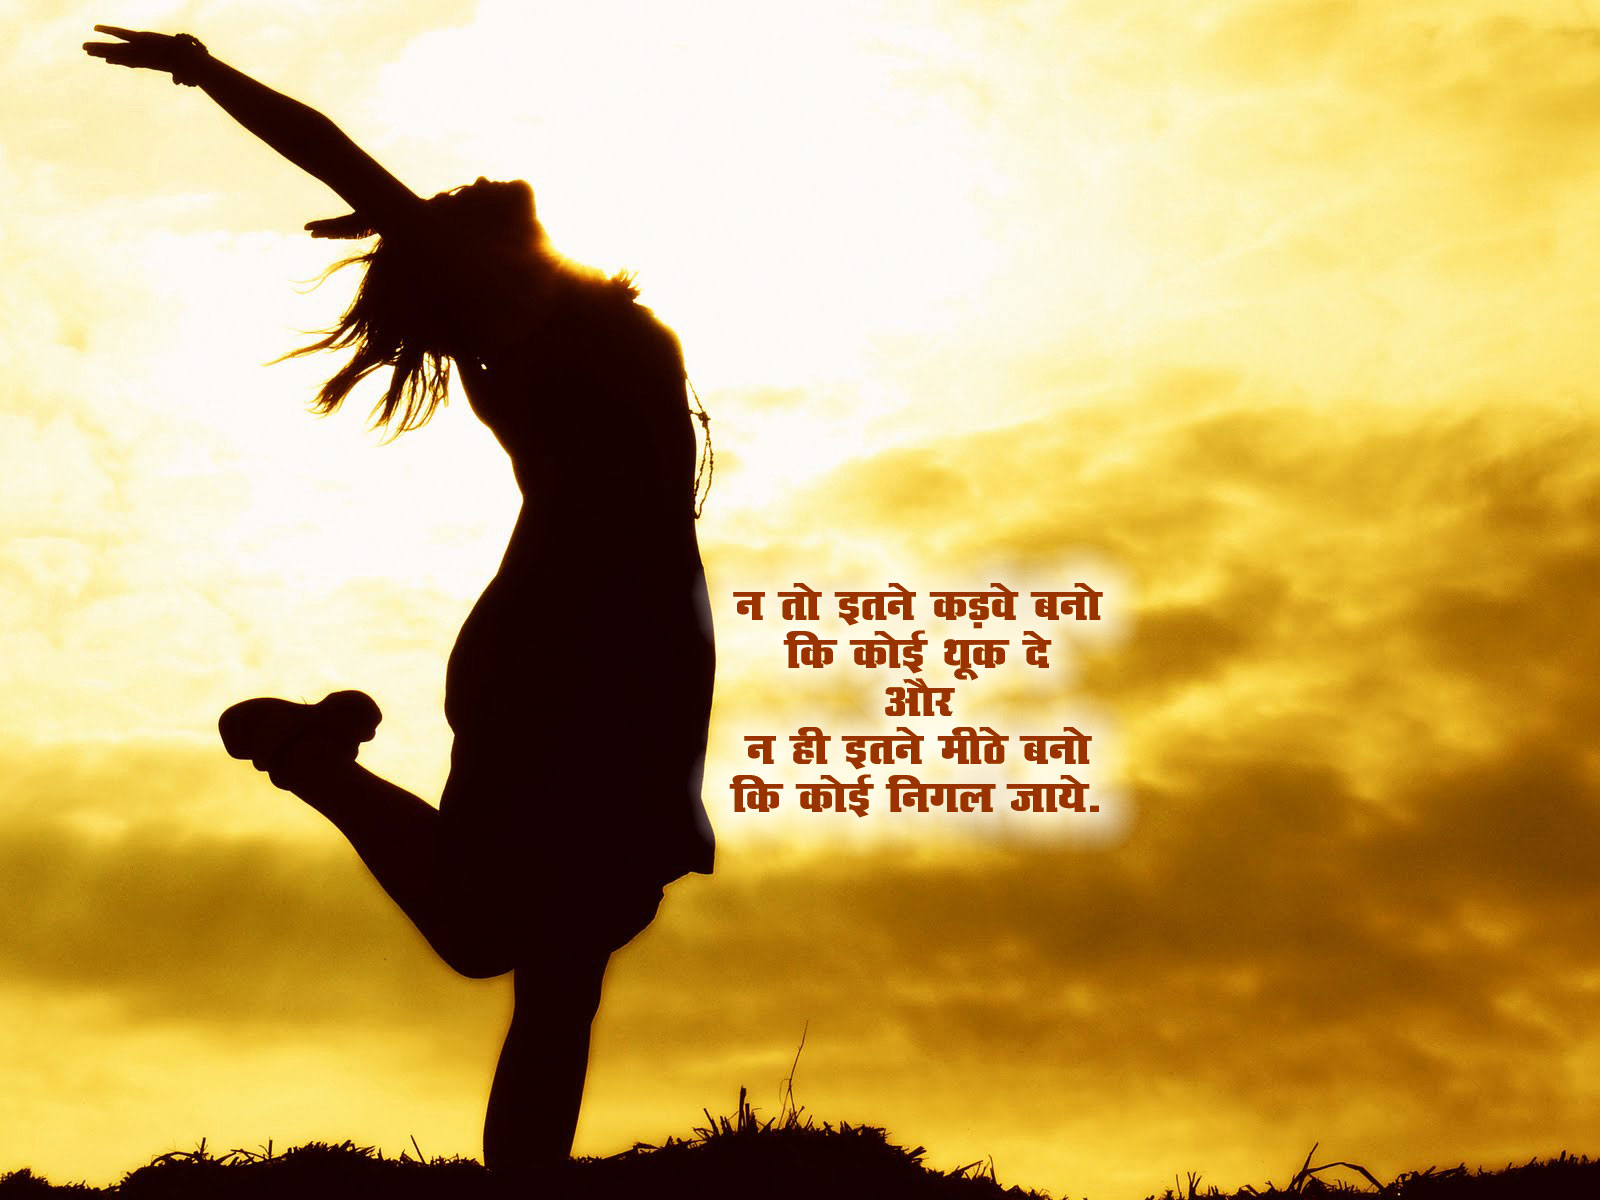 Inspirational Quotes Wallpapers in Hindi